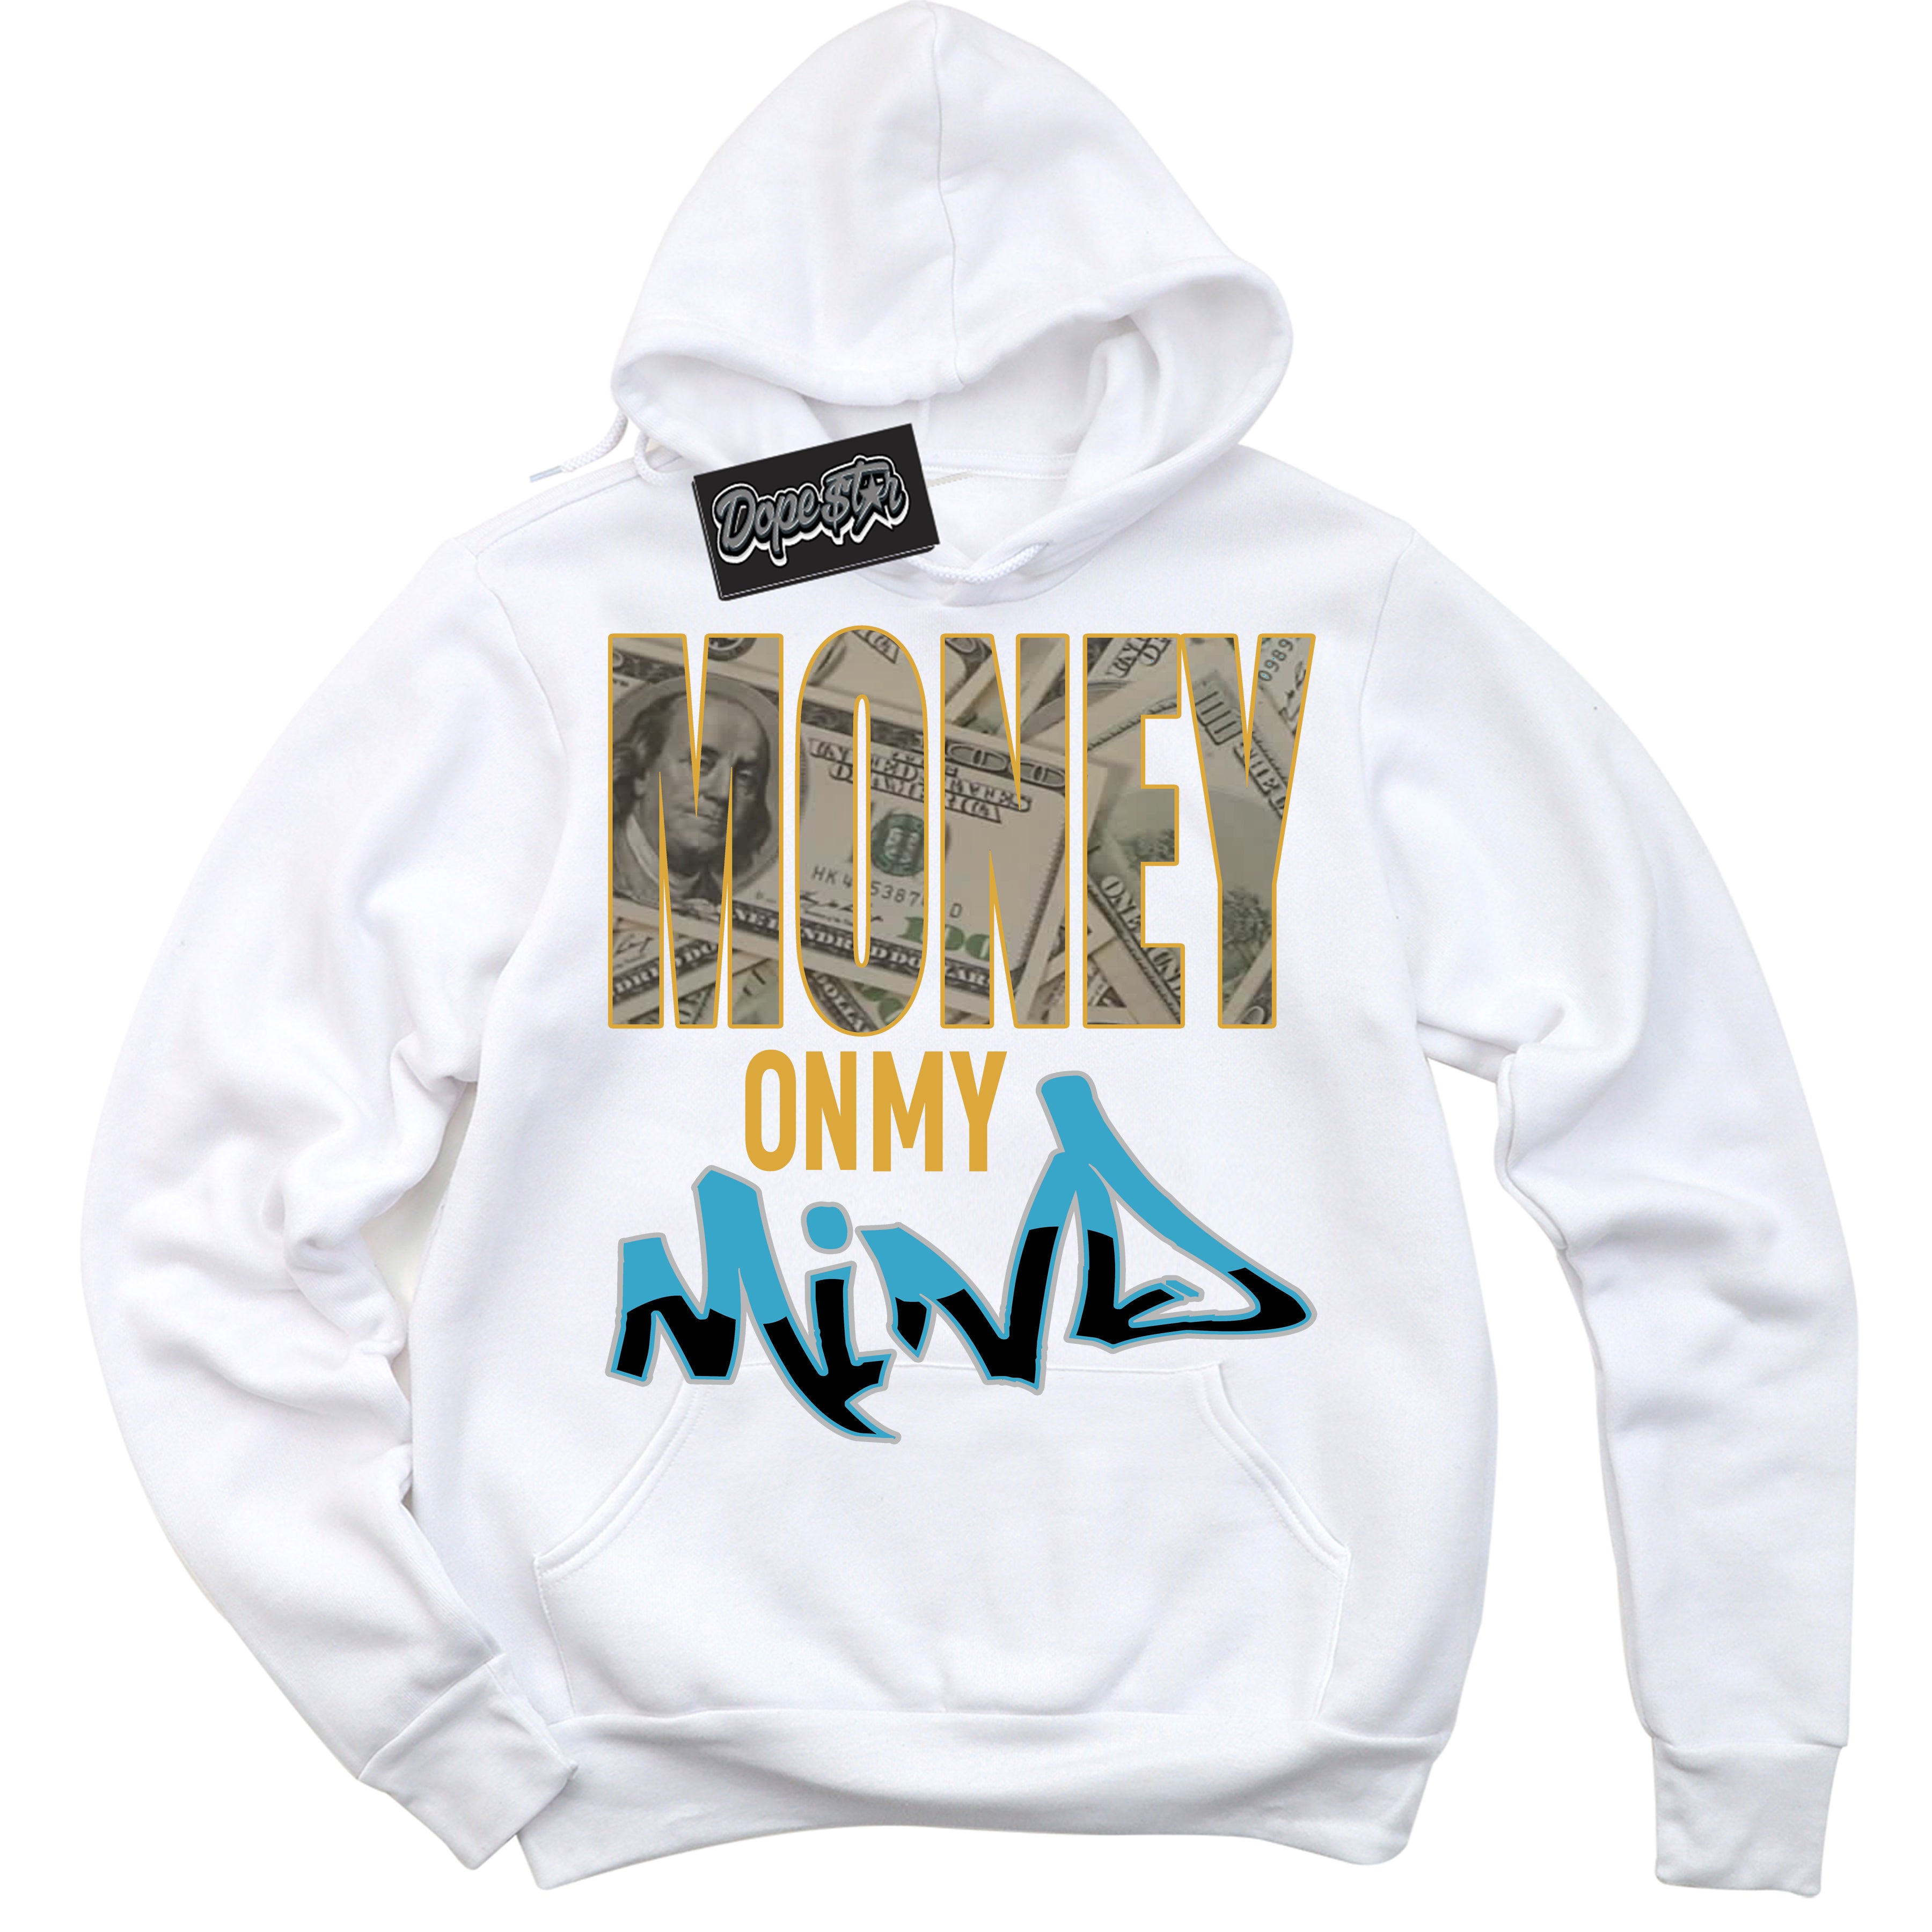 Cool White Hoodie with “ Money On My Mind ”  design that Perfectly Matches Aqua 5s Sneakers.